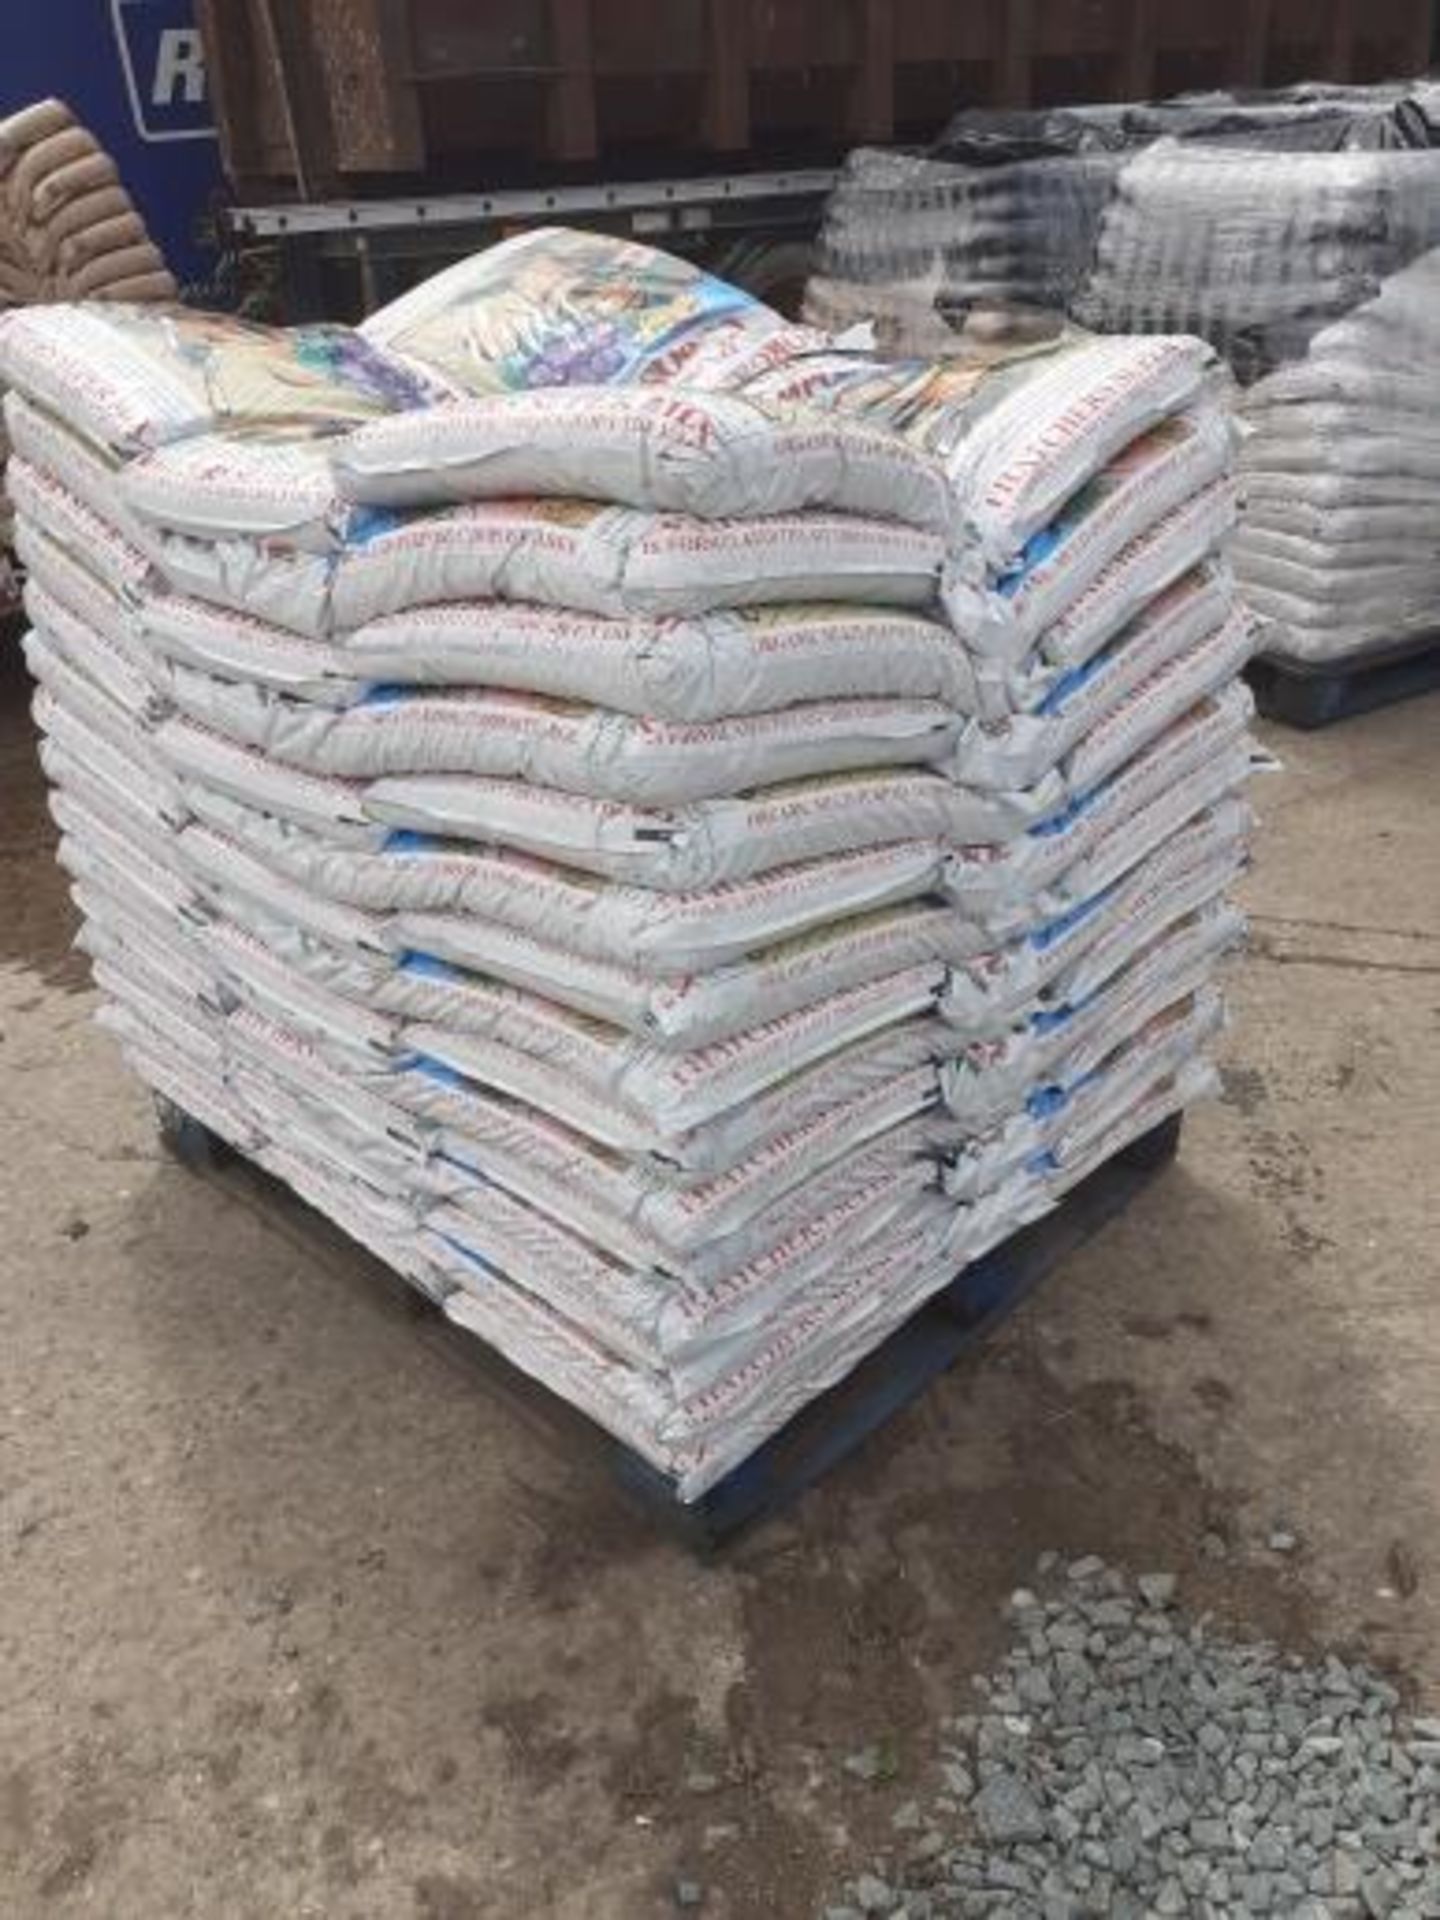 1 PALLET OF TOP GRADE COMPOST, EACH BAG CONTAINS 40 LITRES, 75 BAGS PER PALLET, APPROX WEIGHT 800kg - Image 4 of 5